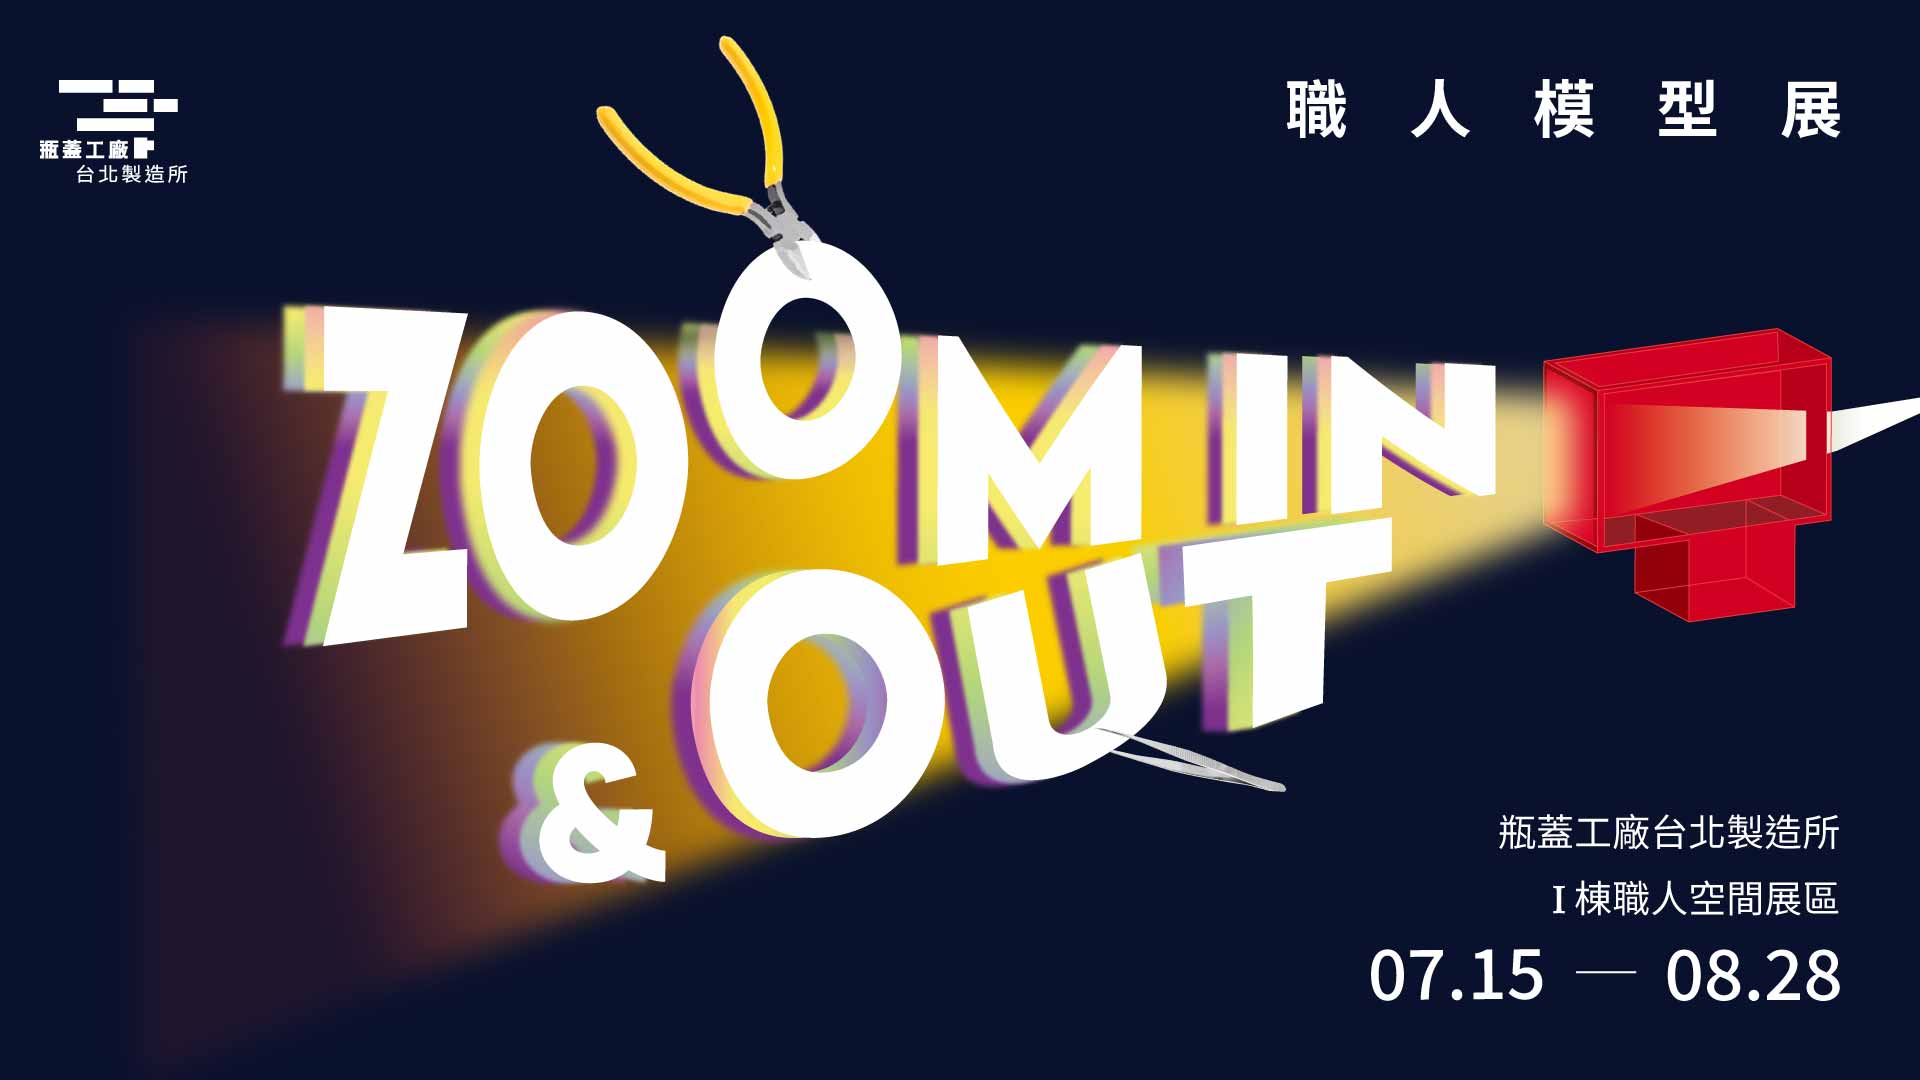 『Zoom In & Out』職人模型展